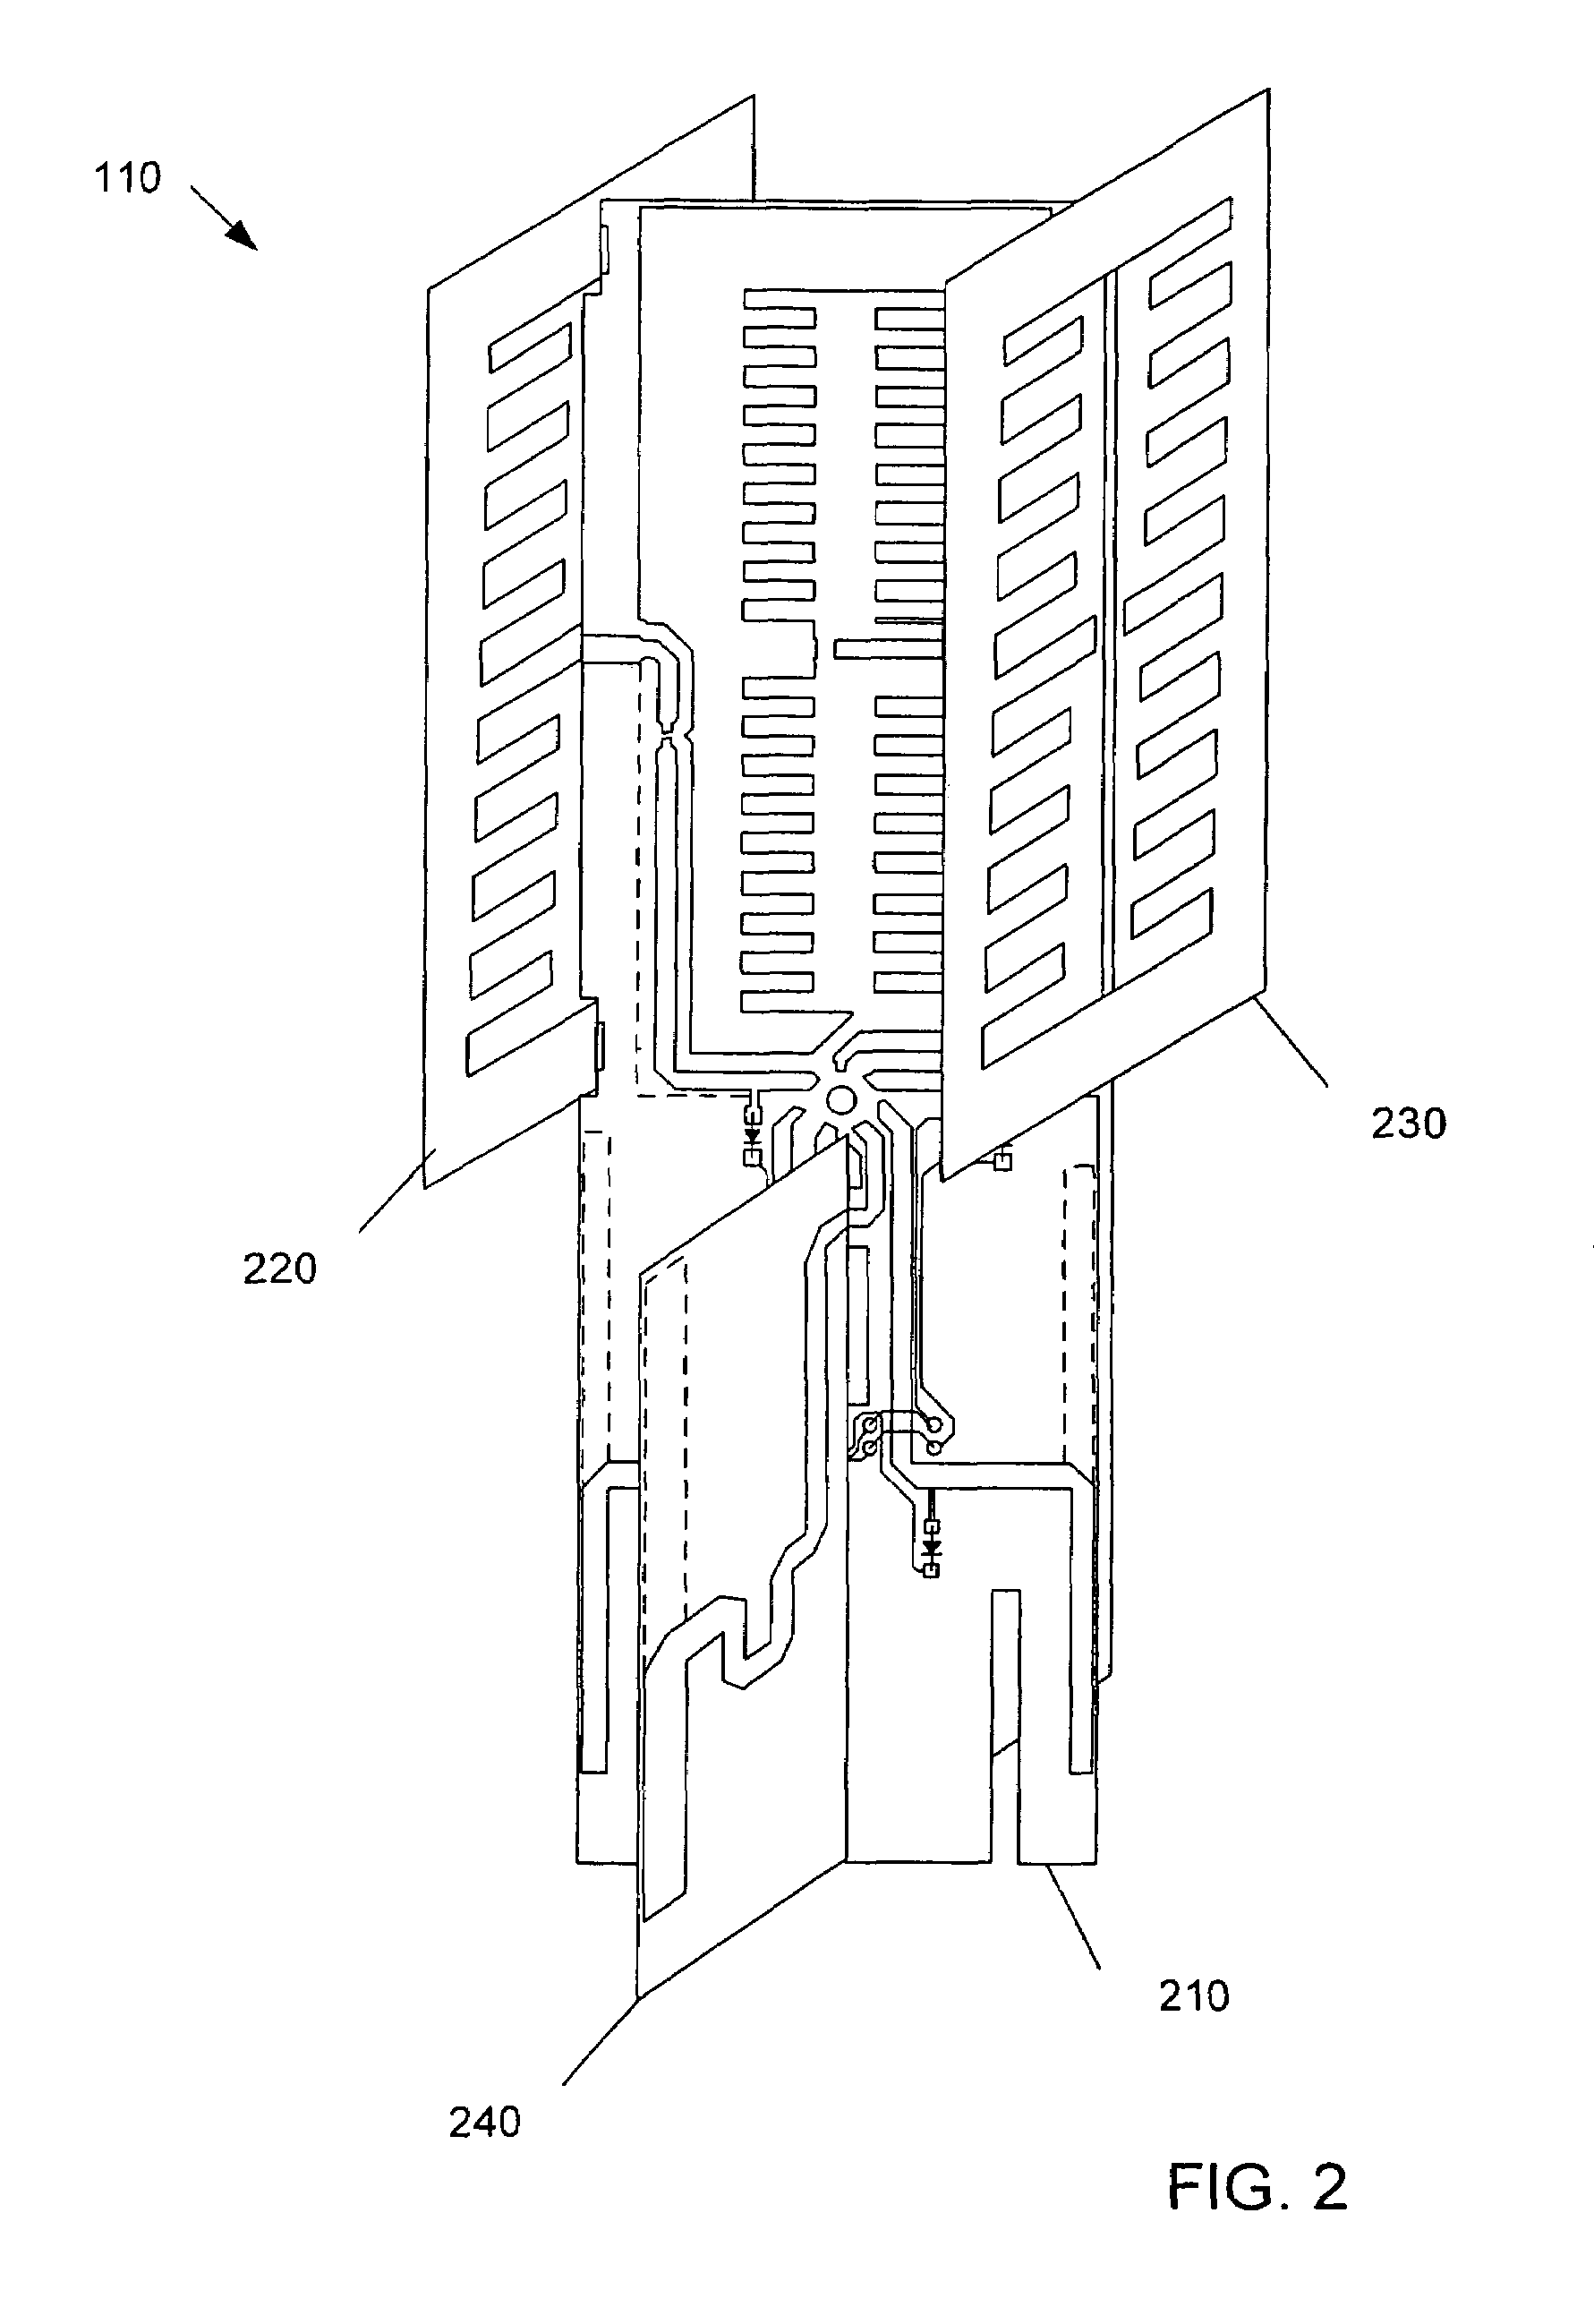 Coverage antenna apparatus with selectable horizontal and vertical polarization elements